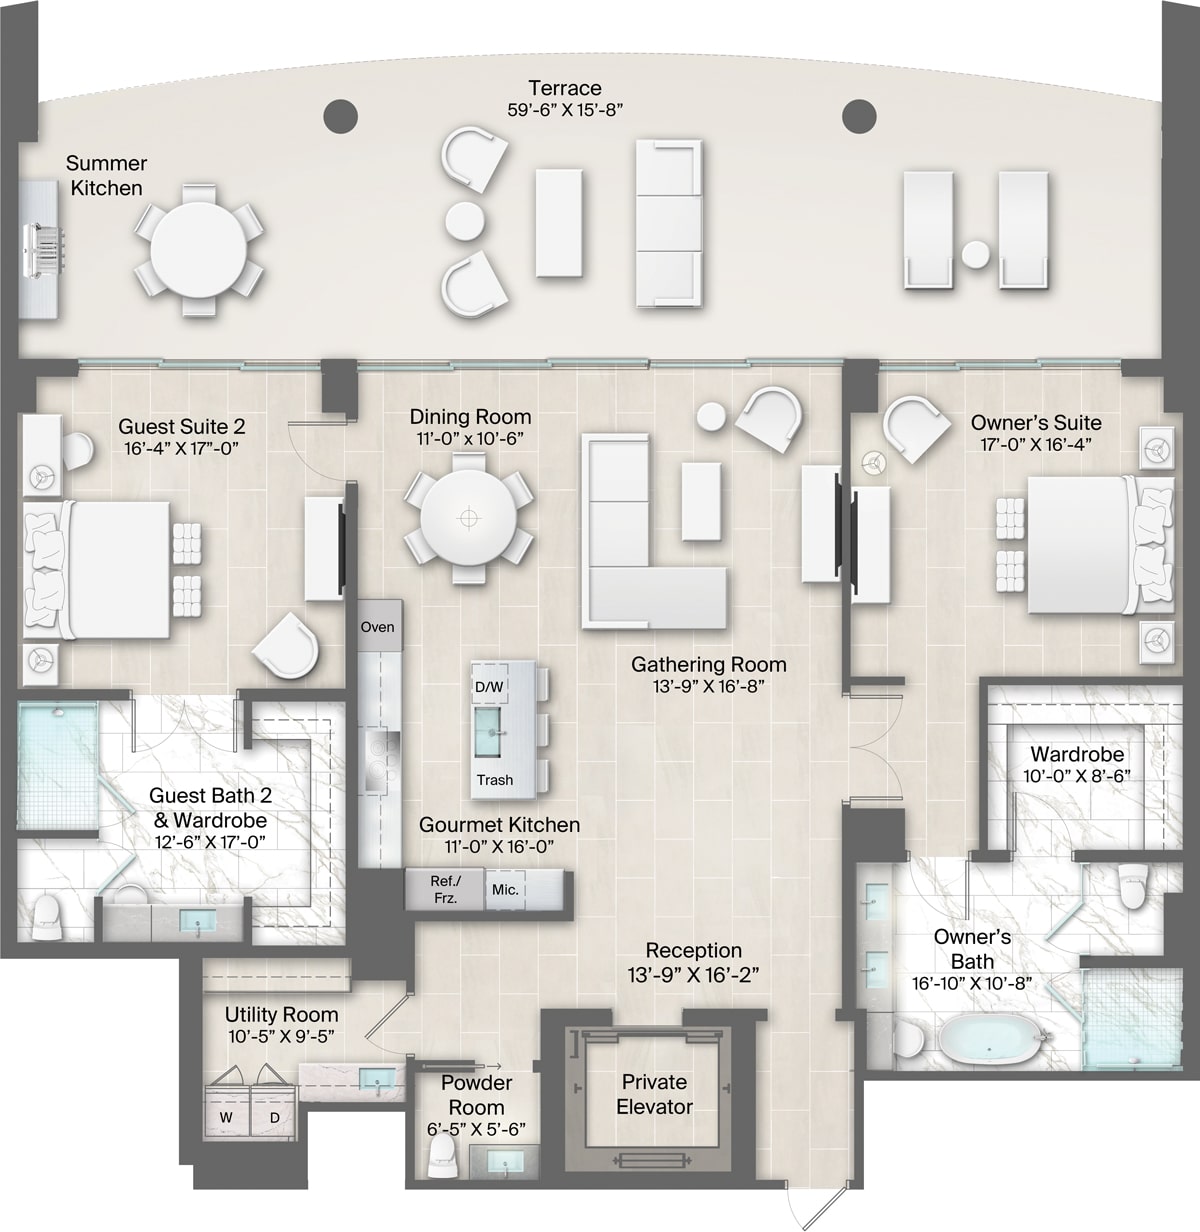 Champagne Building, Plan 14 Floorplan includes 2 bedrooms, 2.5 baths and terrace